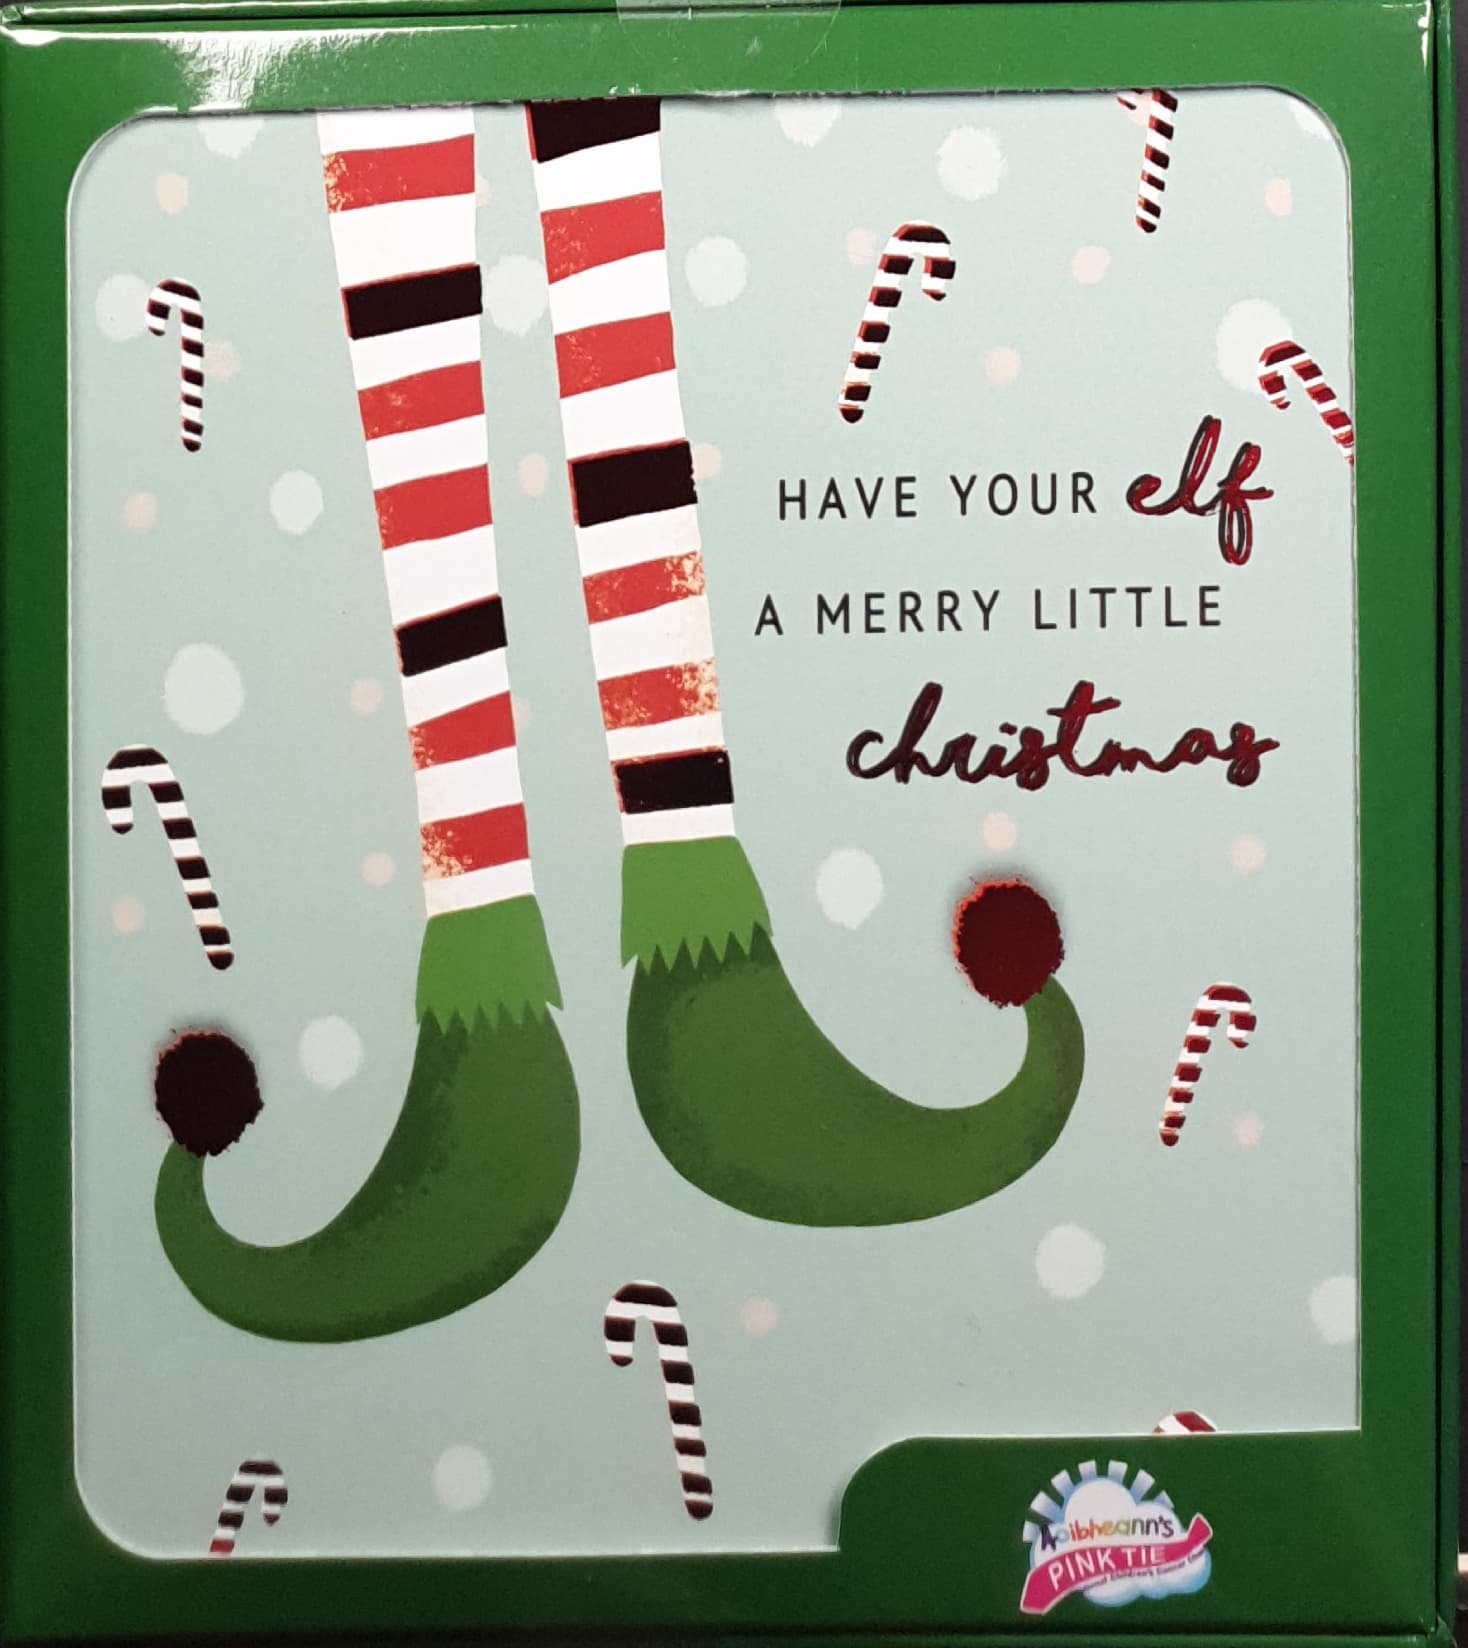 Charity Christmas Card (In Irish & English) - Box of 16 / Aoibheann's Pink Tie - Elf Legs & Candy Canes